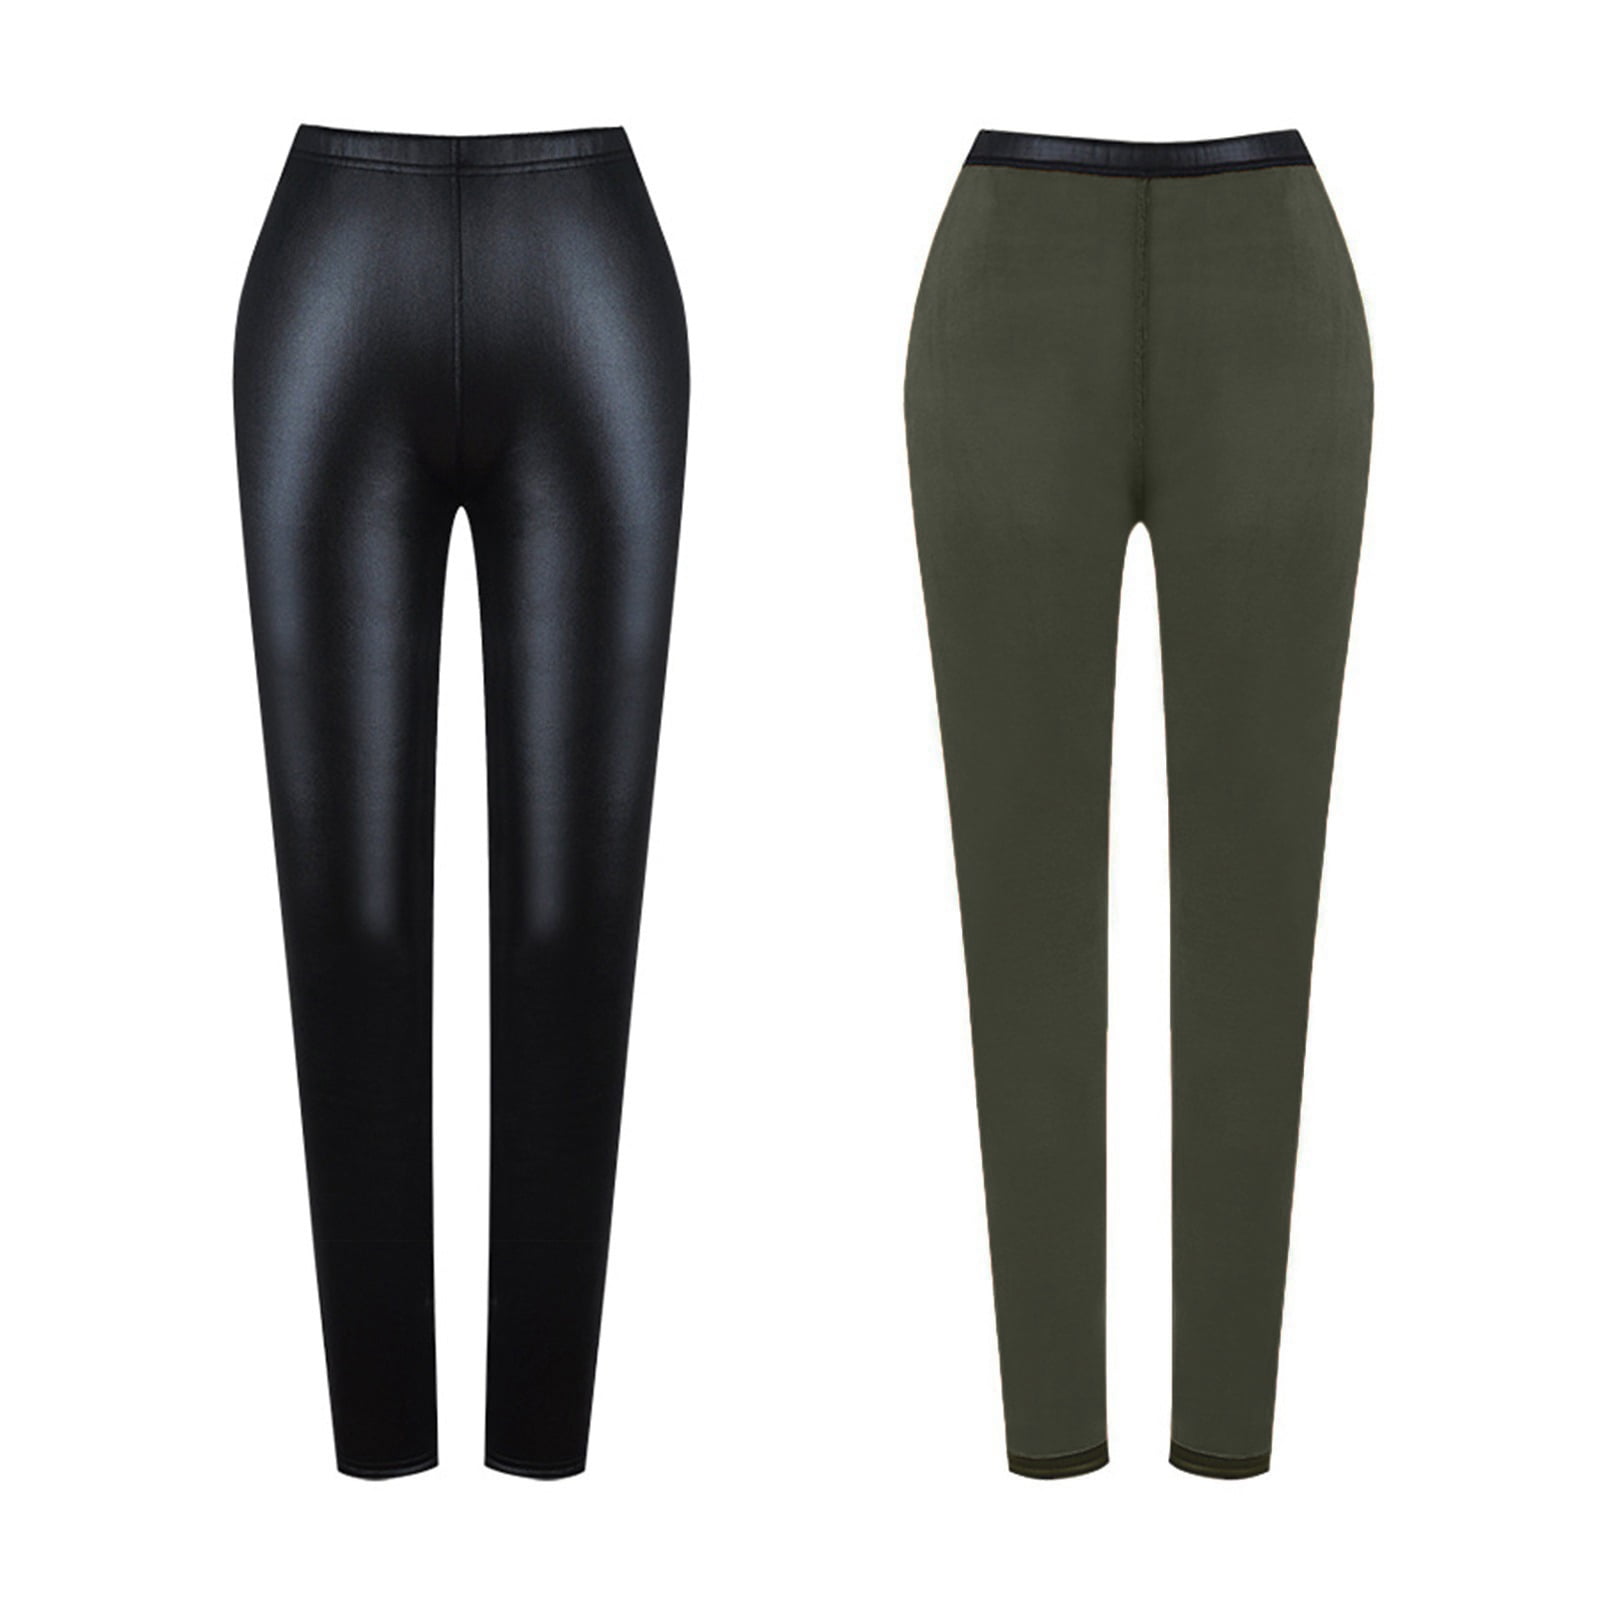 Women Faux Leather Leggings High Waisted Fleece Lined Stretchy